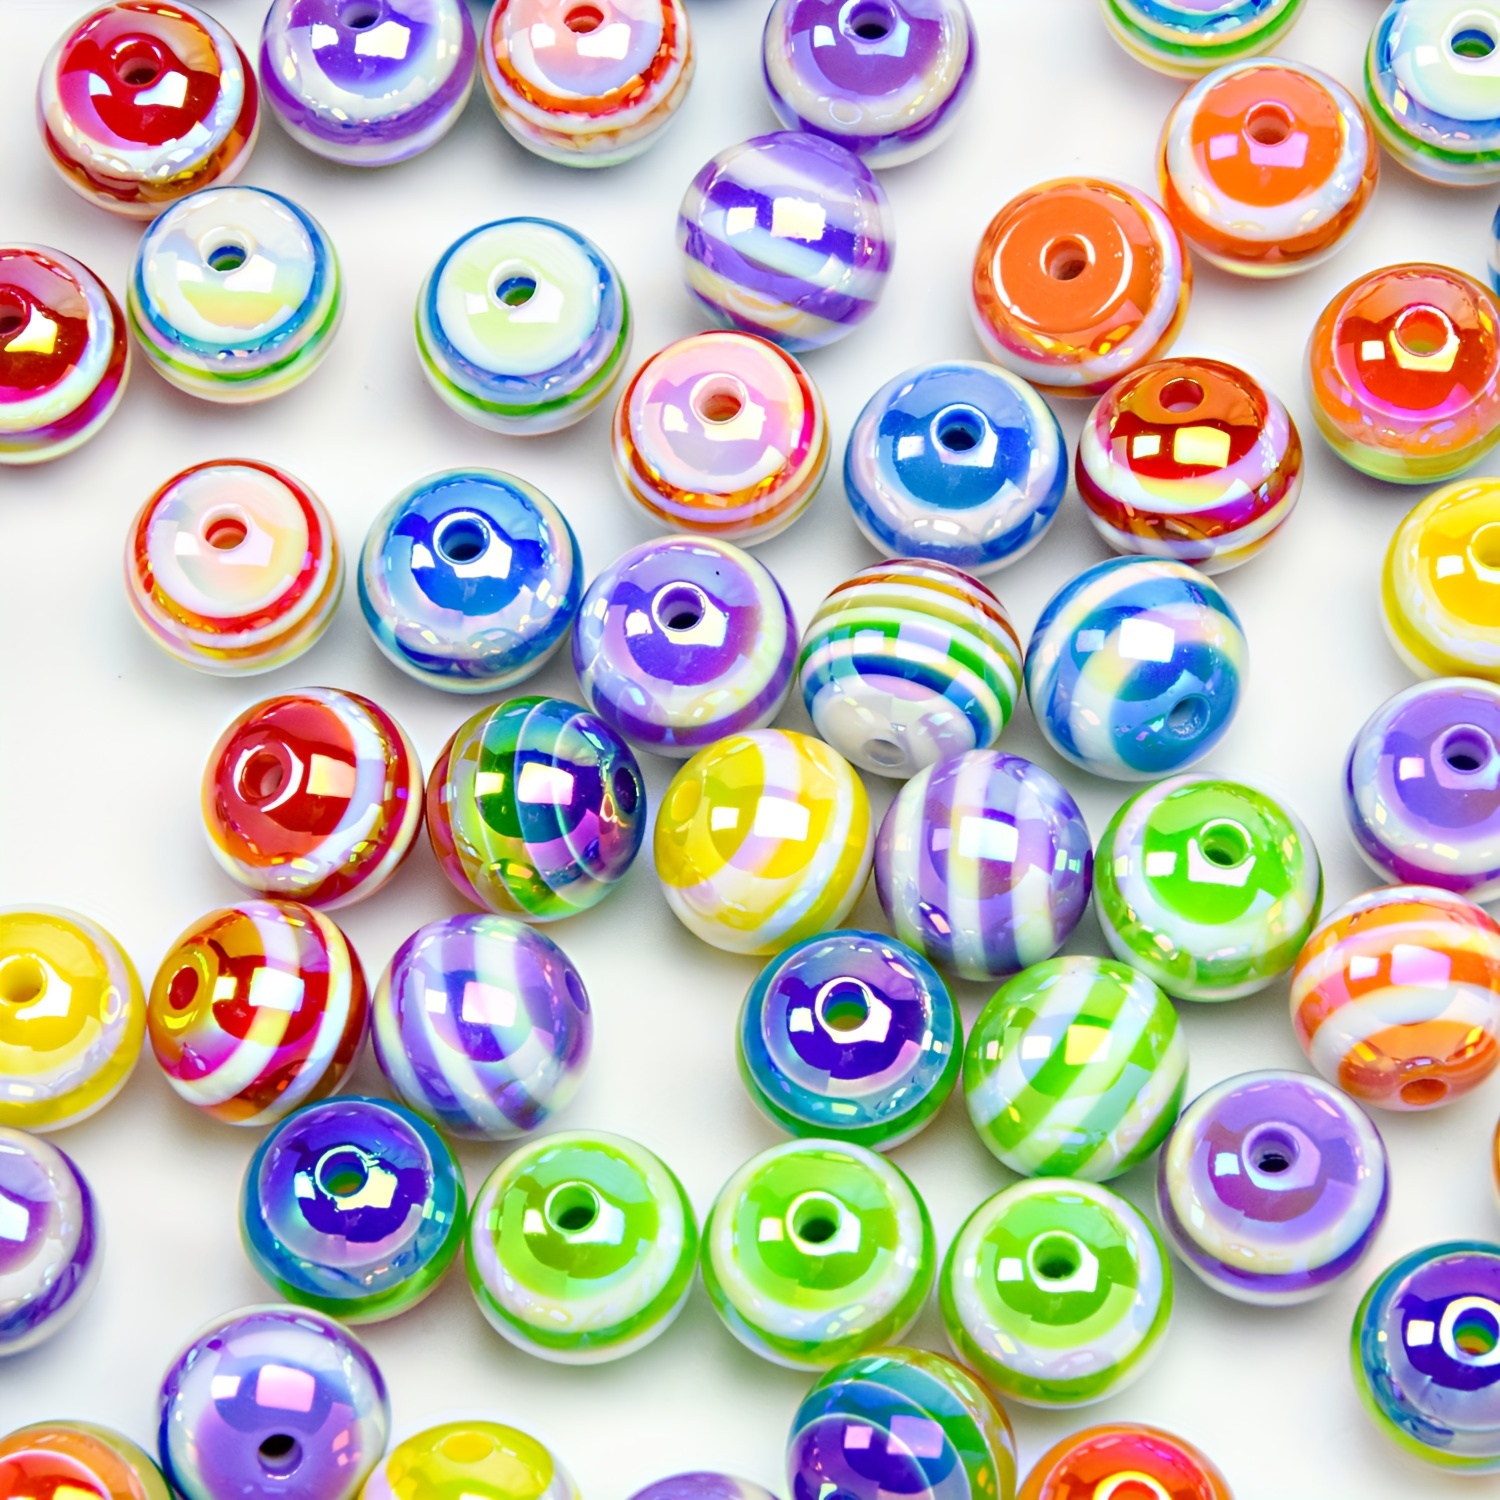 

20/40pcs 16mm Uv Plated Resin Round Straight Hole Rainbow Candy Color Random Cute Striped Lollipop Beads For Jewelry Making Diy Bracelet Beaded Decors Craft Supplies